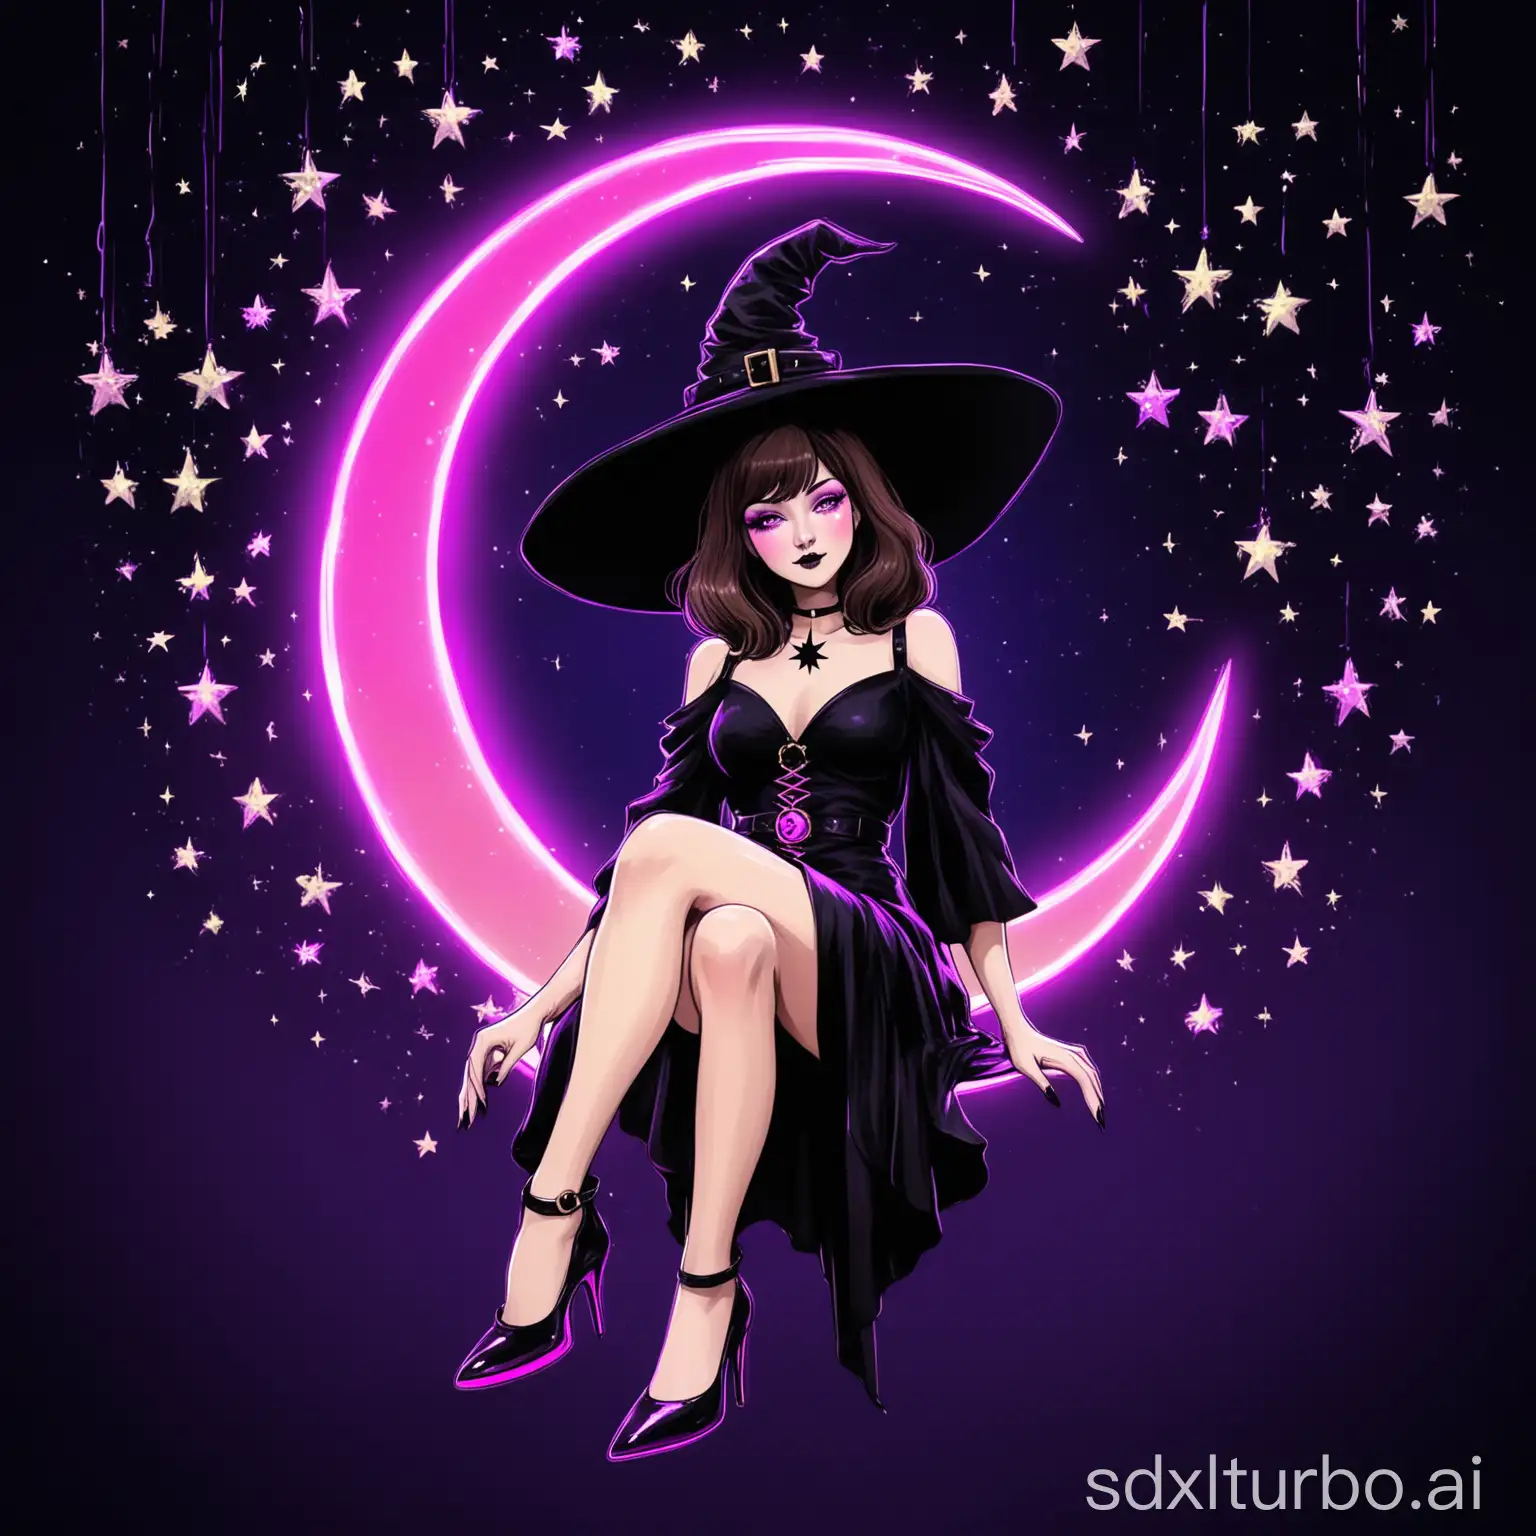 Witchy-Woman-Sitting-in-Neon-Crescent-Moon